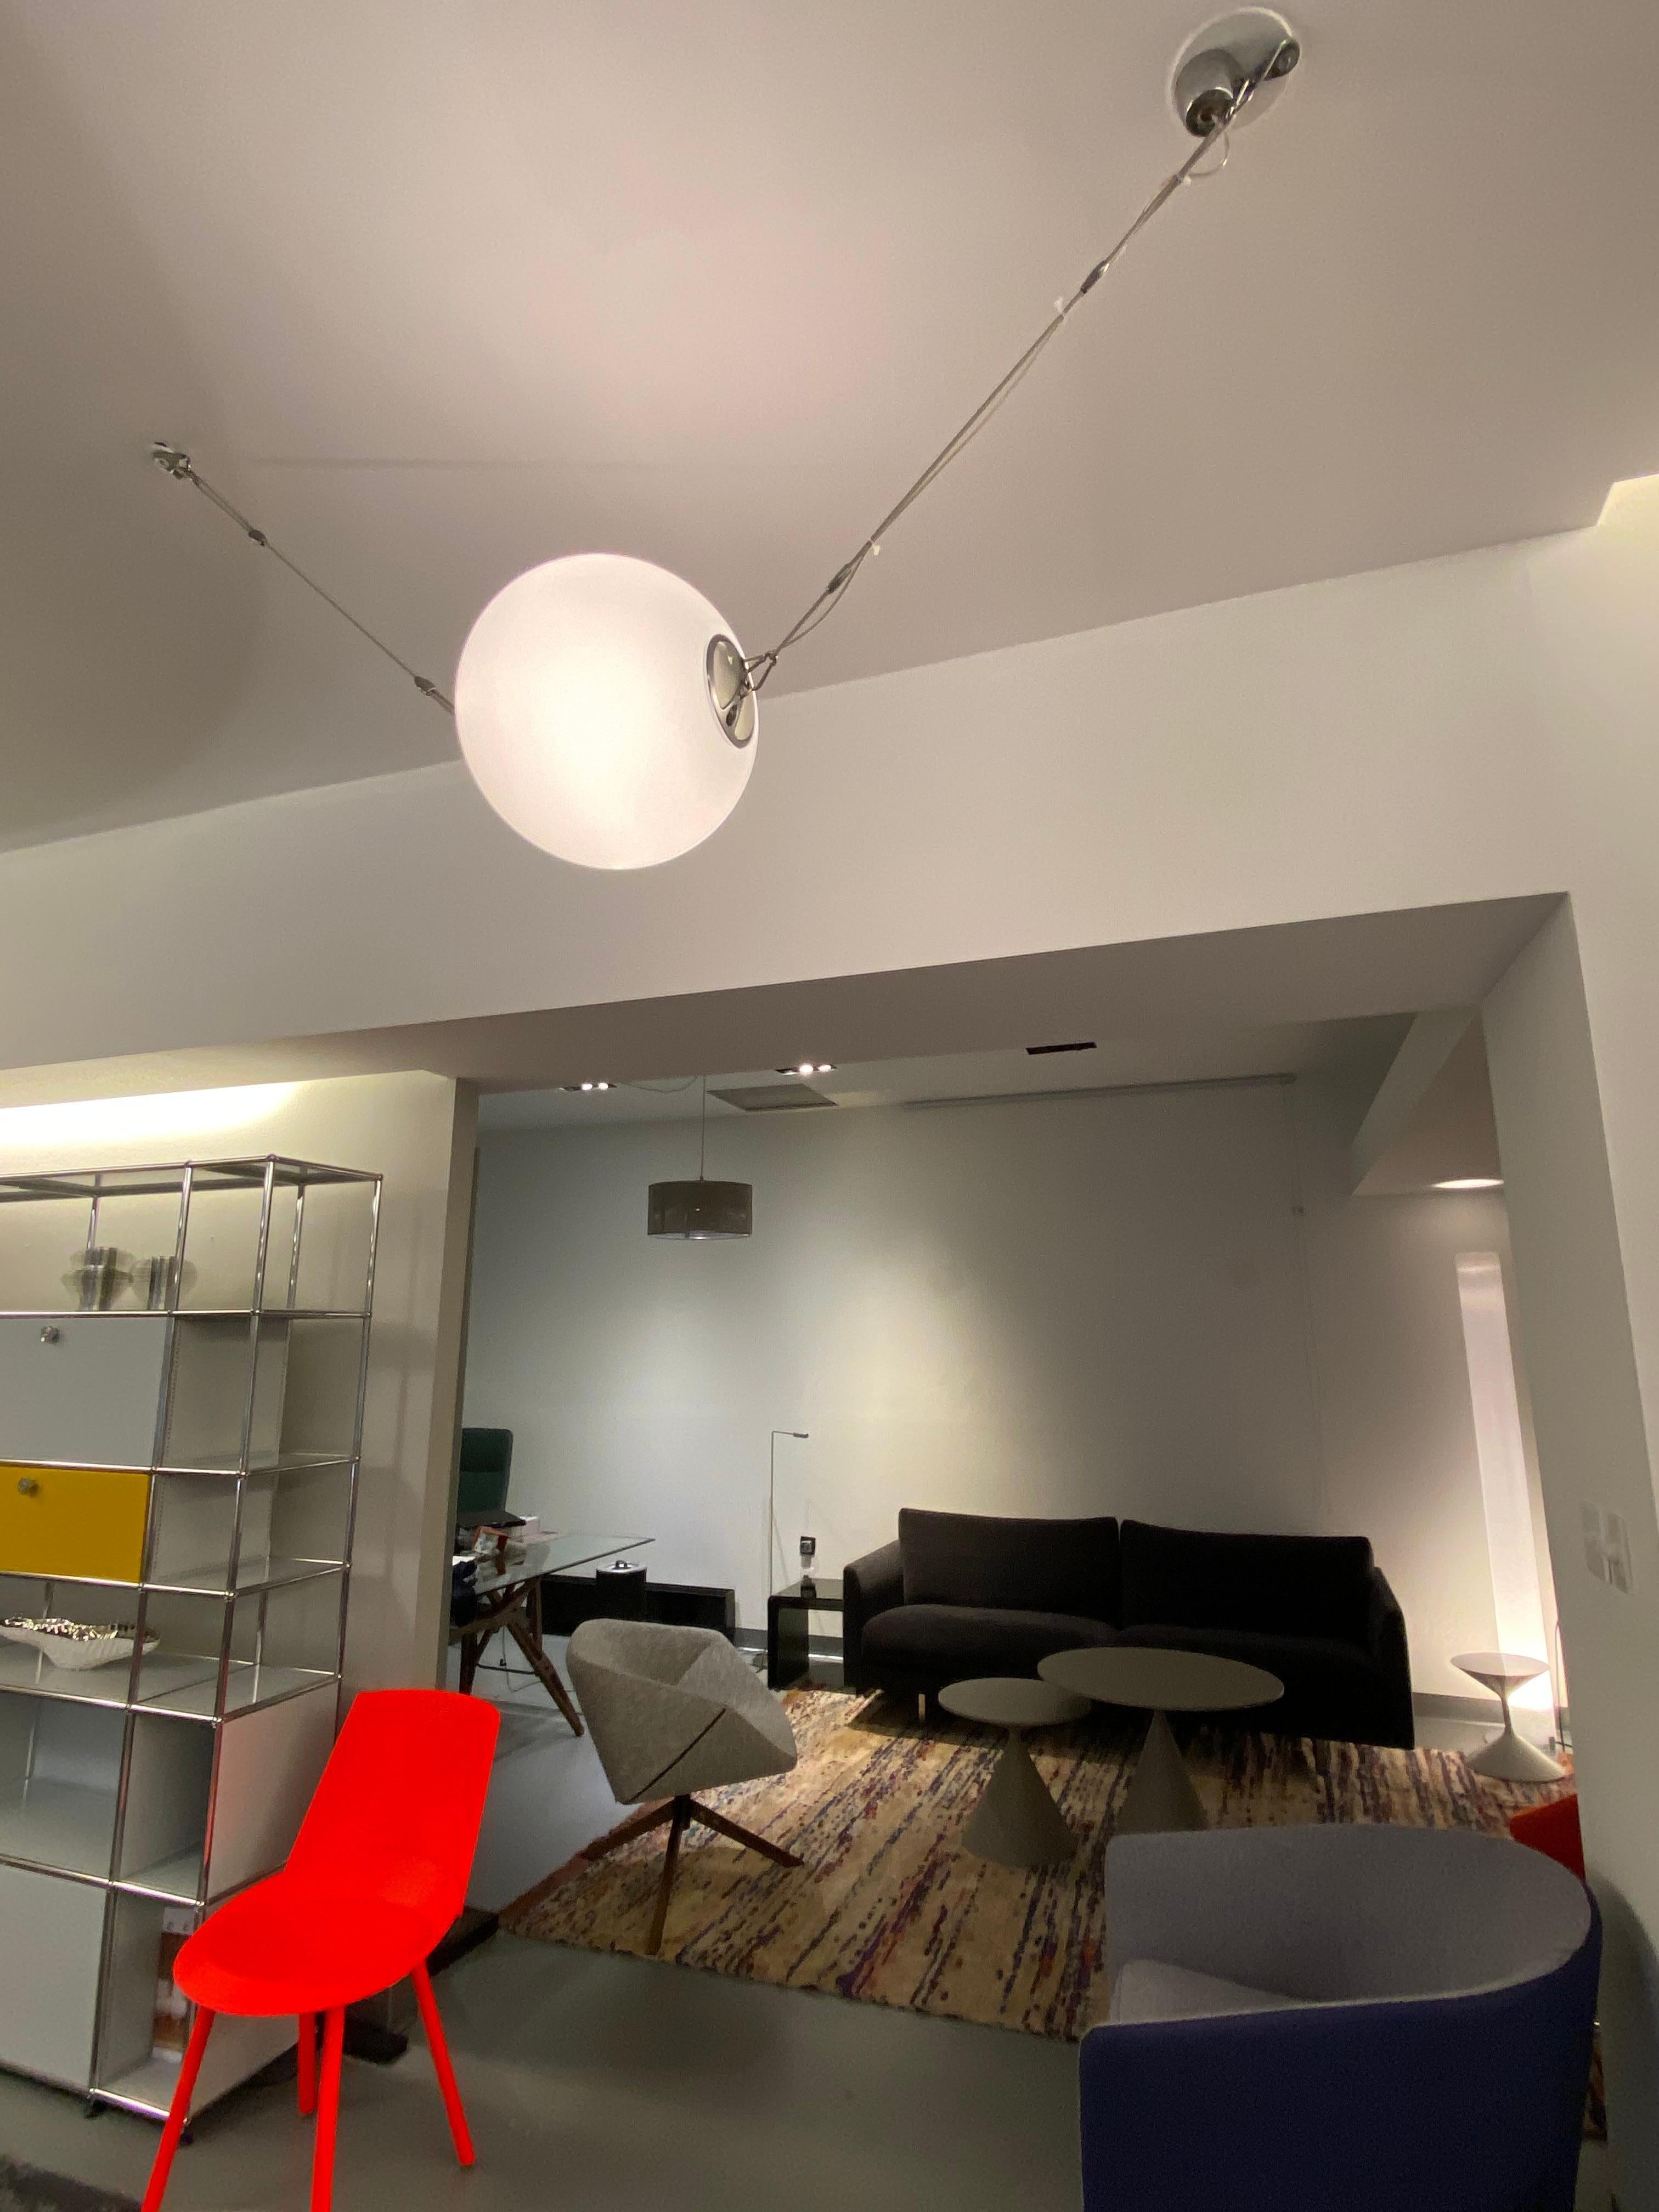 A suspended light fitting for diffused illumination, made of die-cast aluminium with a diffuser of blown glass, available in 2 sizes and powers. Possibility of cascaded installations since you can electrically connect several fittings to the same